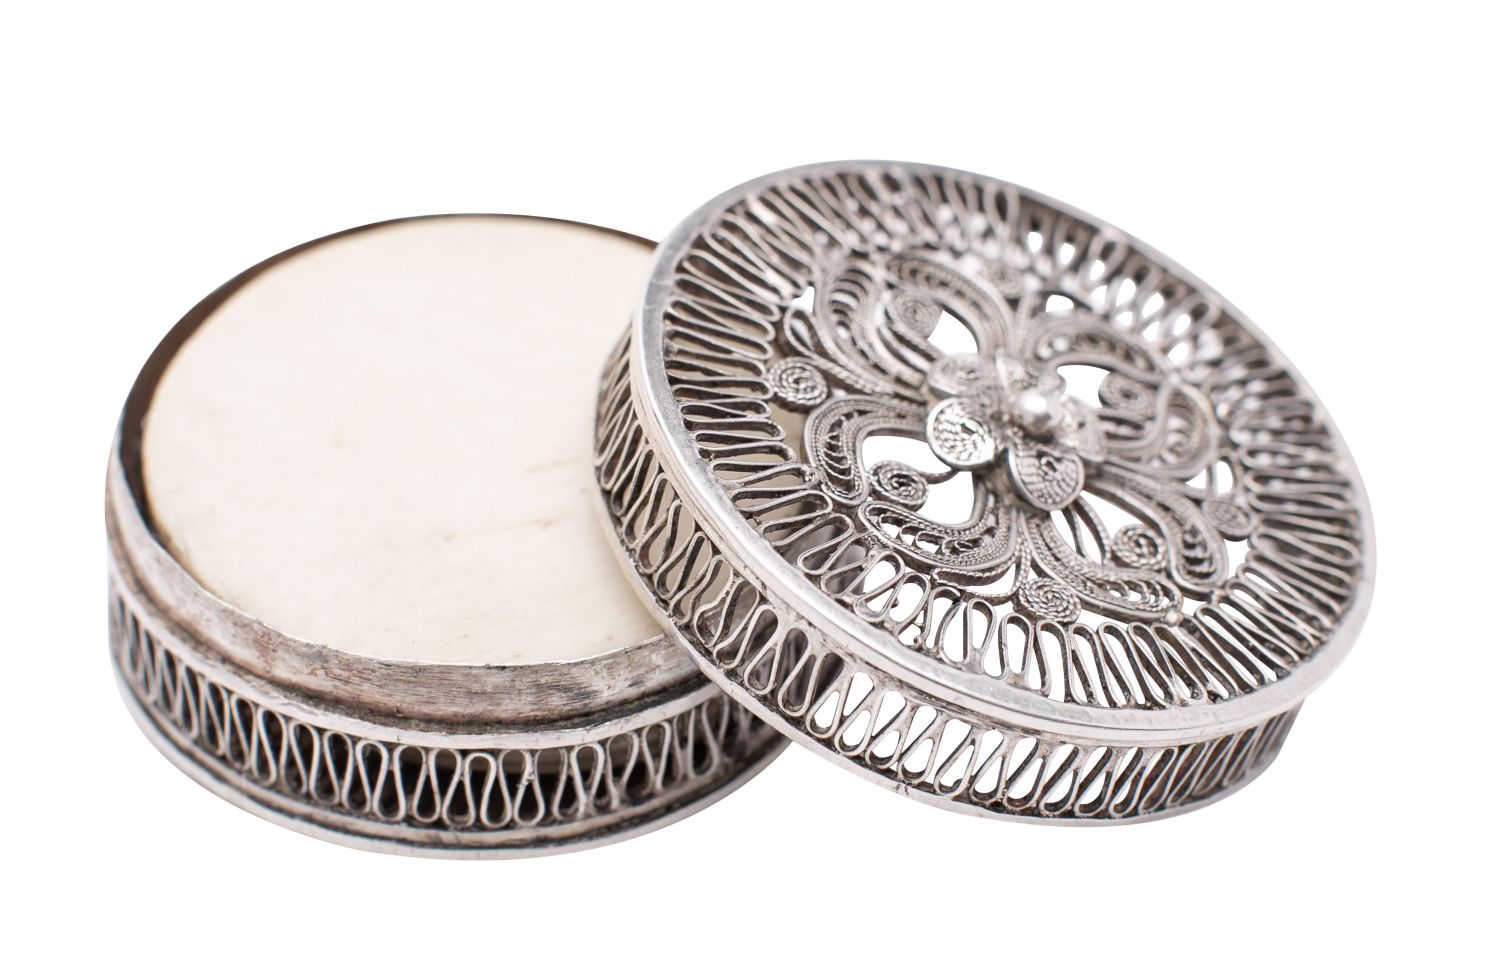 An English silver filigree gaming counter box, un- marked possibly 18th century, of circular form, - Image 2 of 2